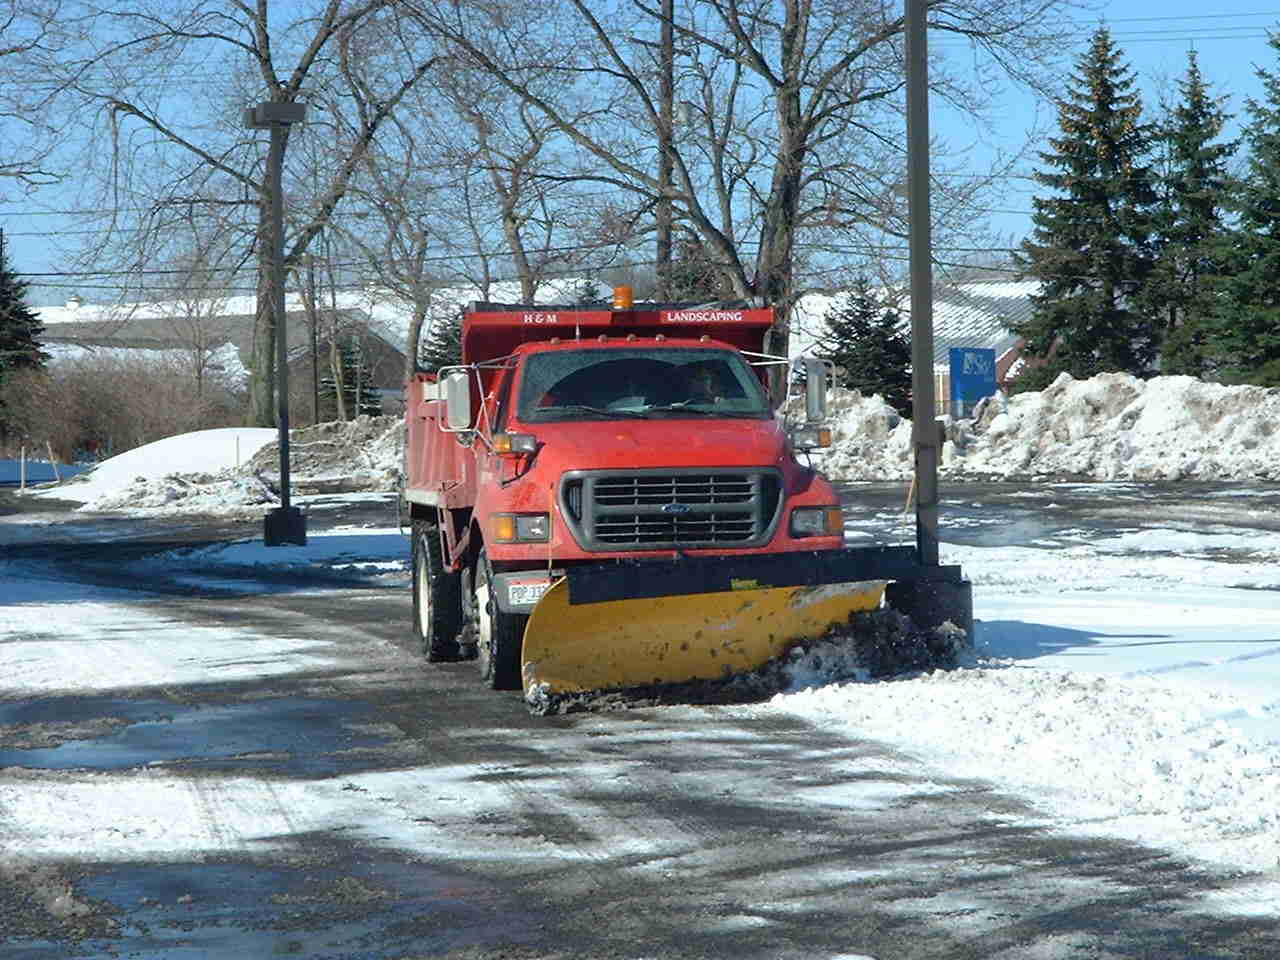 Large Dump Truck with Snowplow Plowing Snow in Cleveland Area Parking Lot